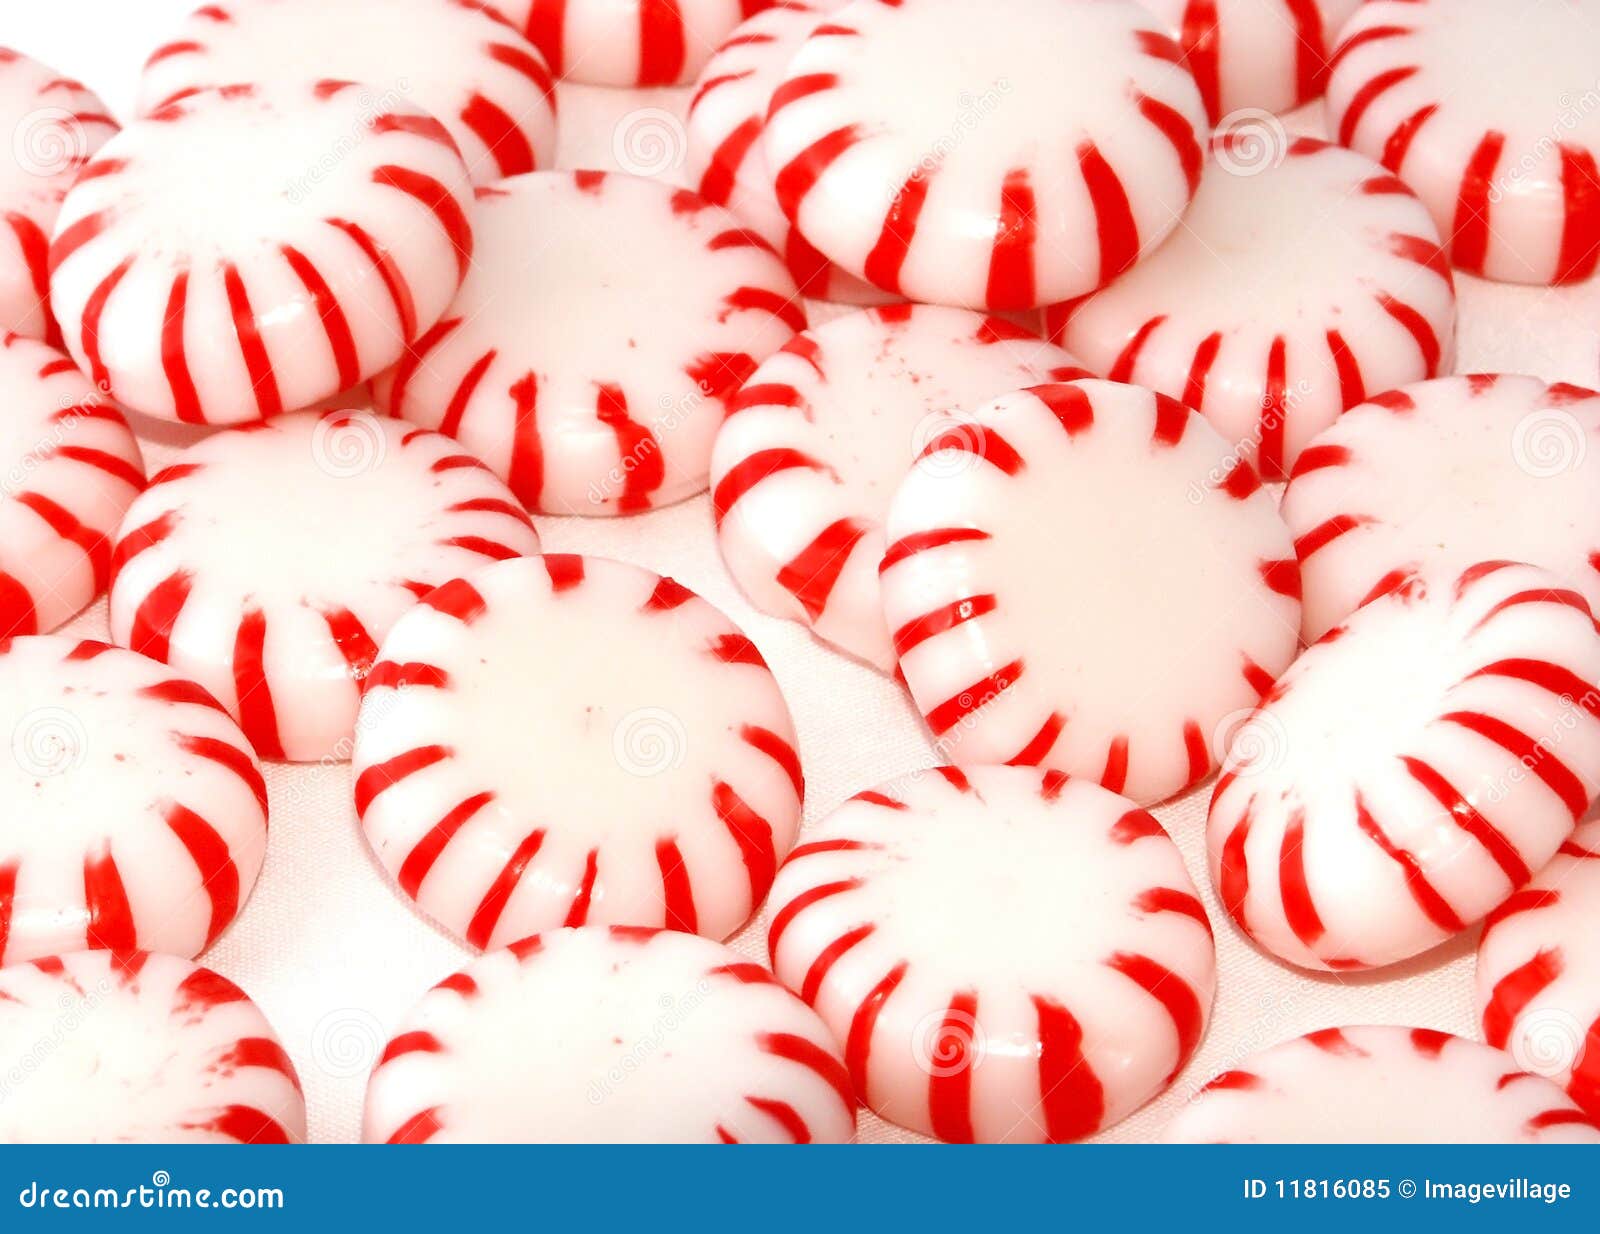 Red Mints Royalty Free Stock Photo - Image: 11816085